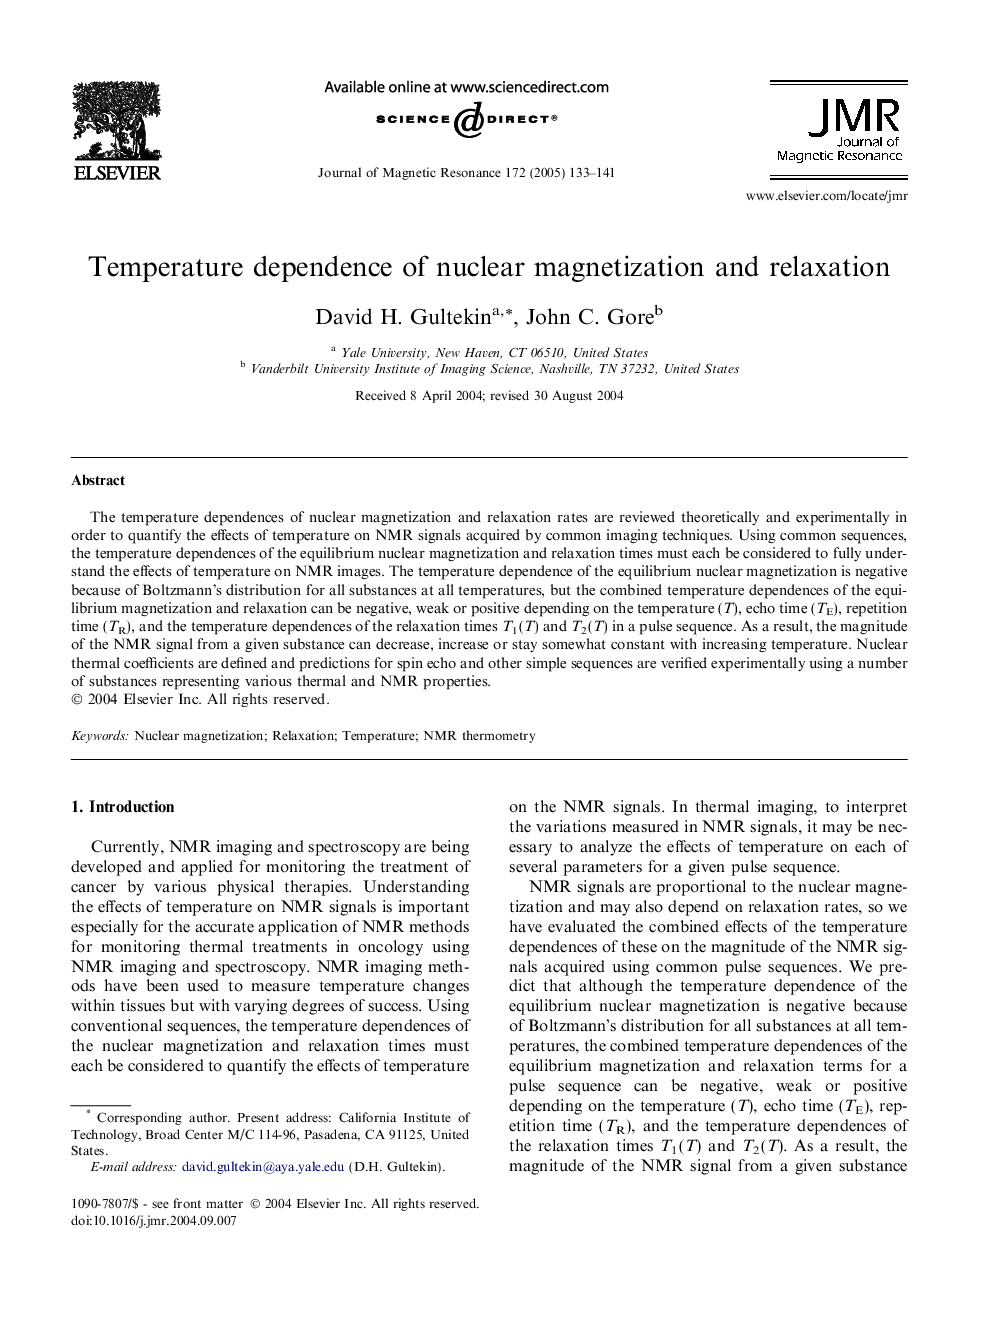 Temperature dependence of nuclear magnetization and relaxation